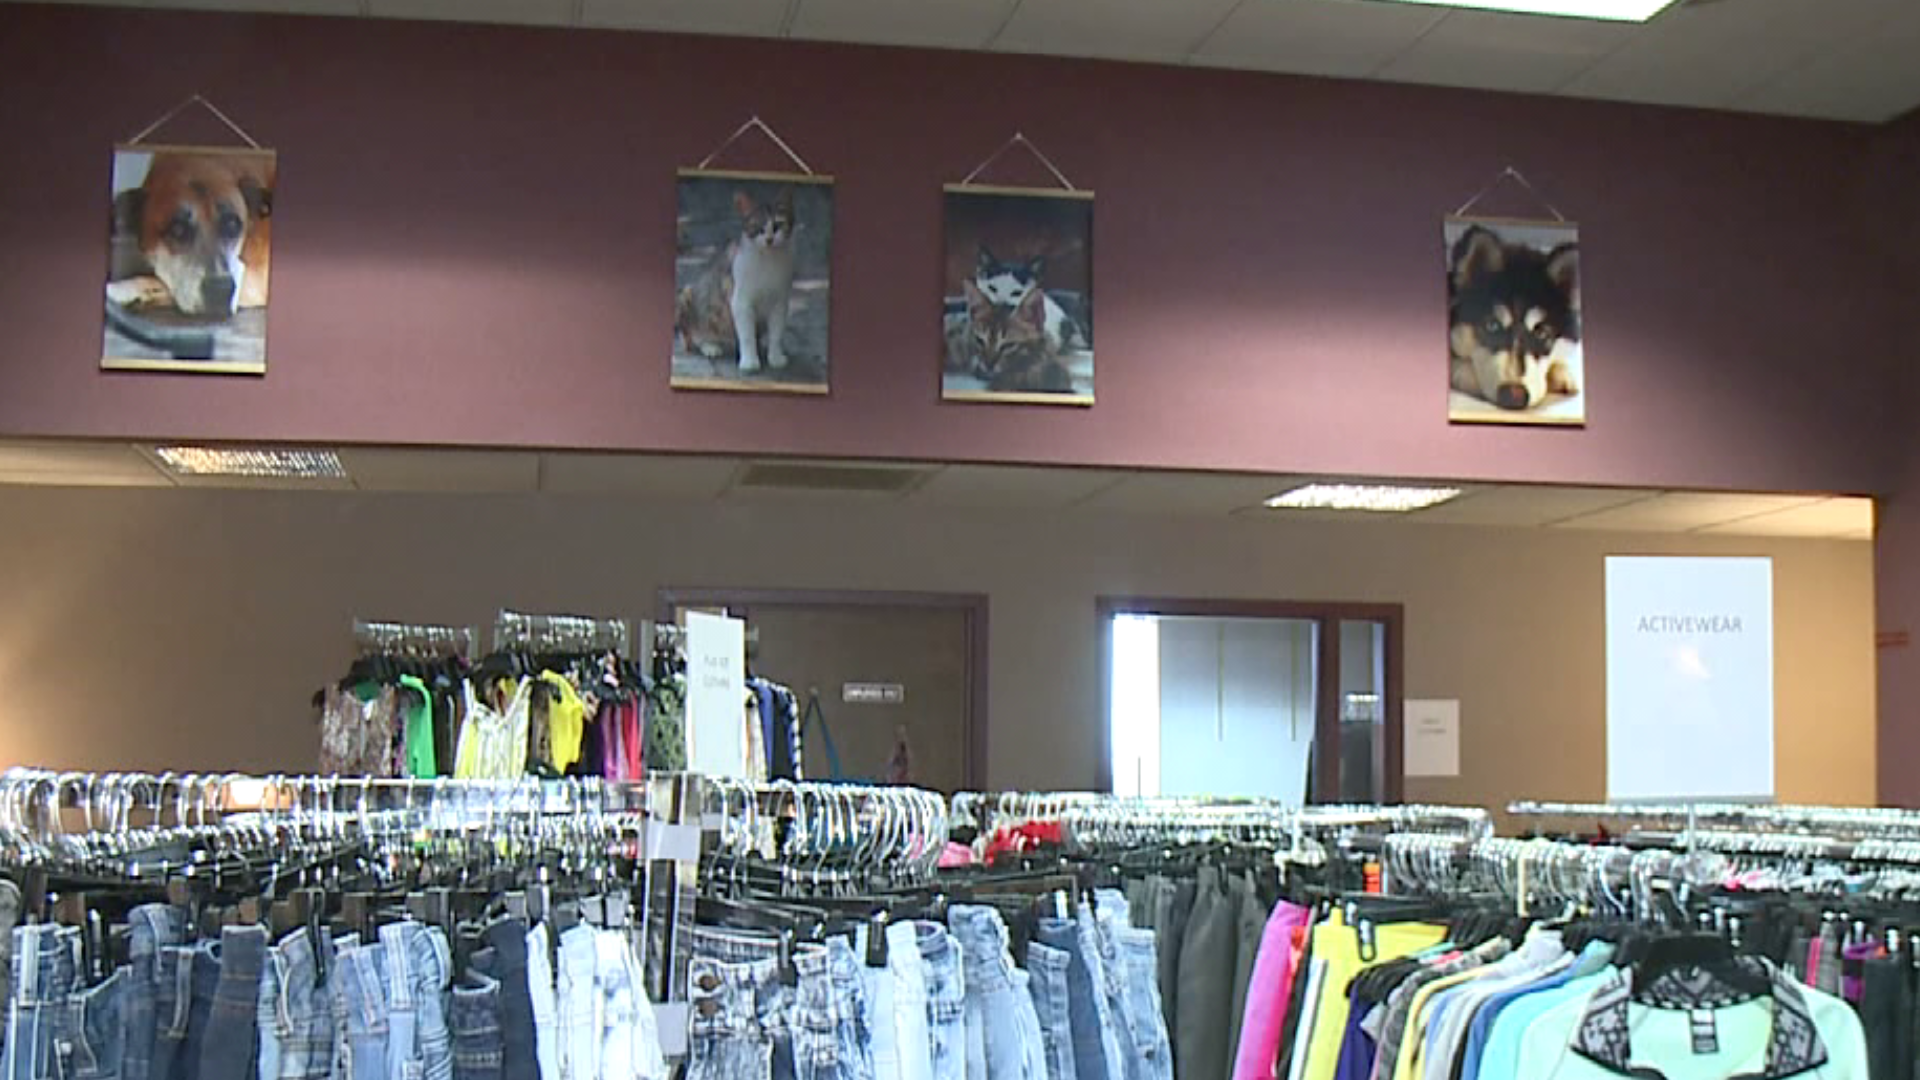 A nonprofit in Luzerne County is trying to power through tough fundraising times during the pandemic by opening a thrift store.